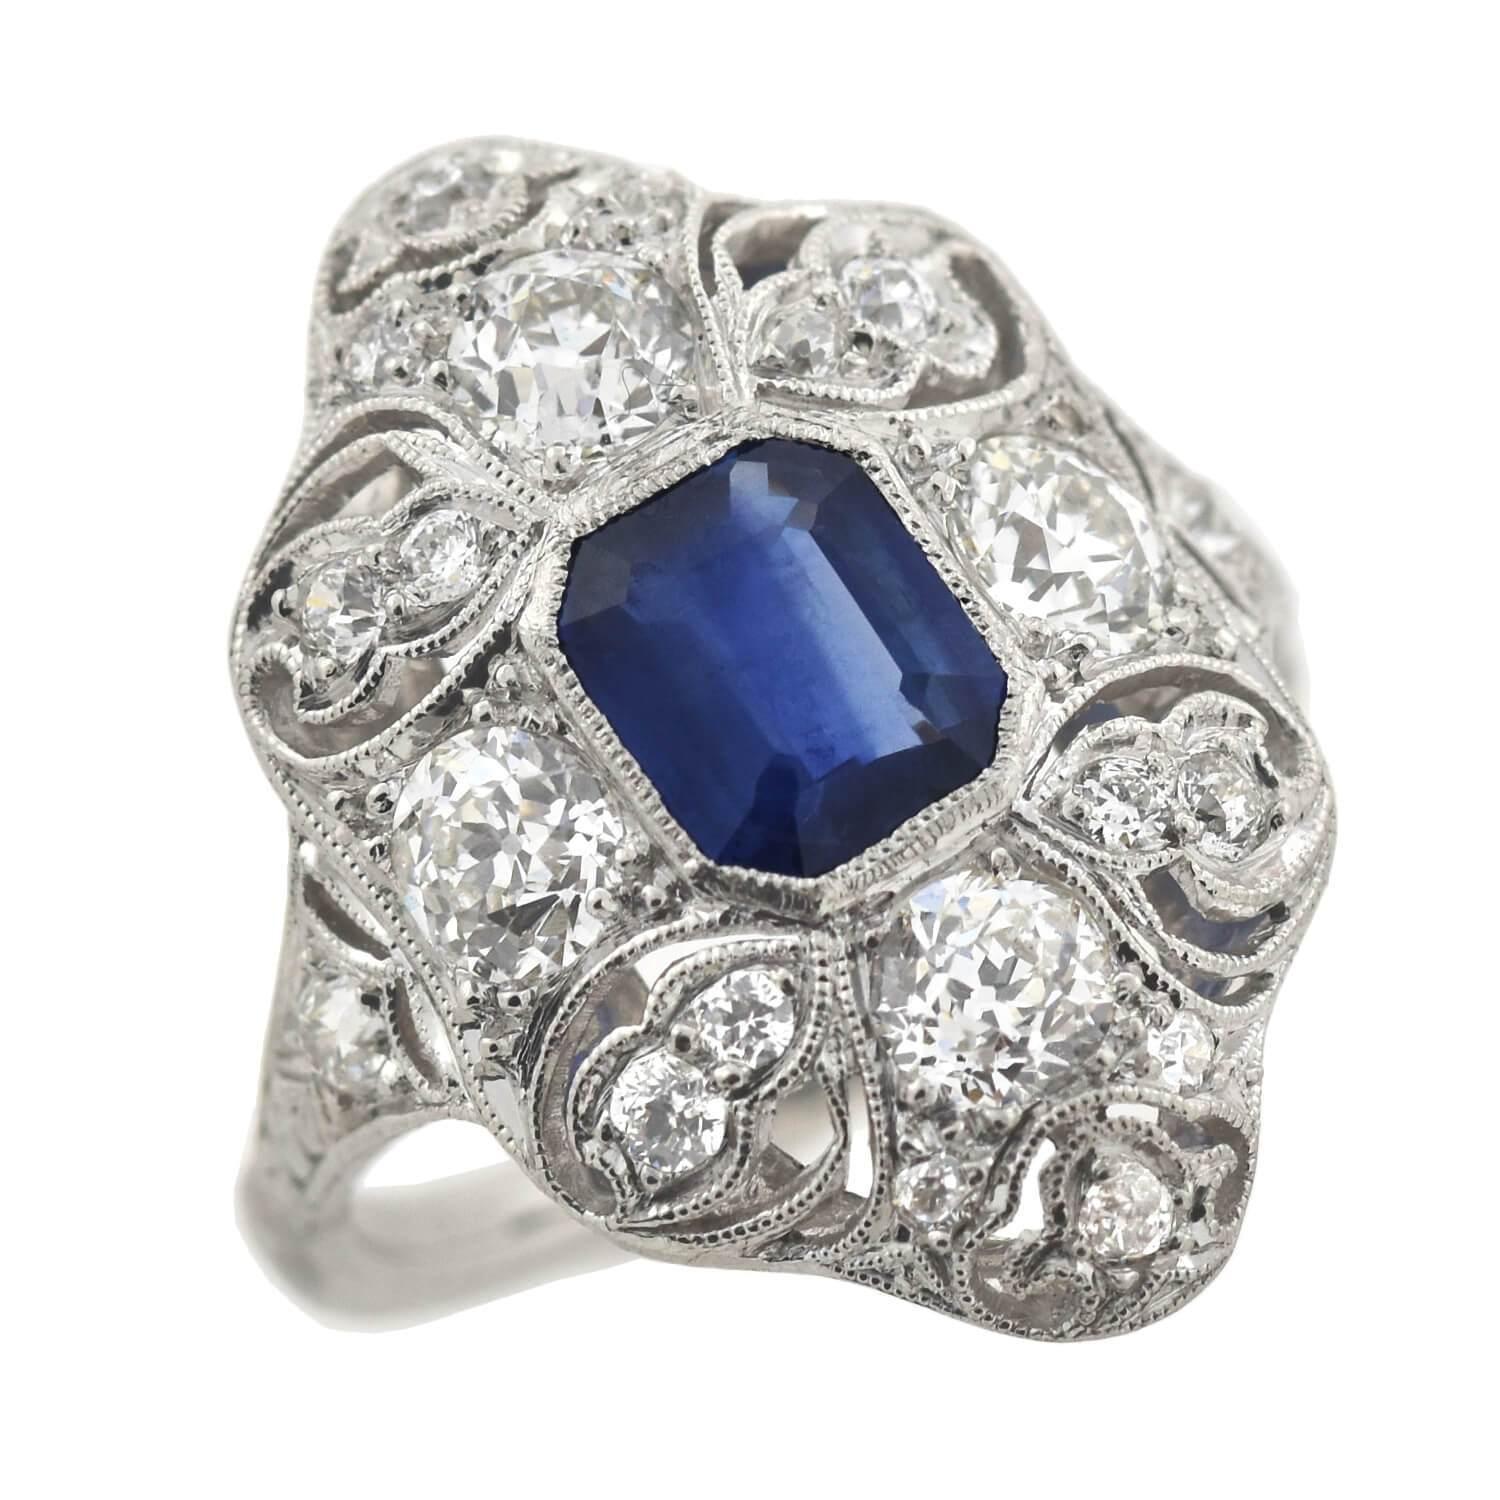 A stunning diamond and sapphire ring from the Edwardian (ca1915) era! This wonderful platinum piece has an elegant filigree setting with an elongated centerpiece that beautifully curves around the finger. Resting at the center is a stunning